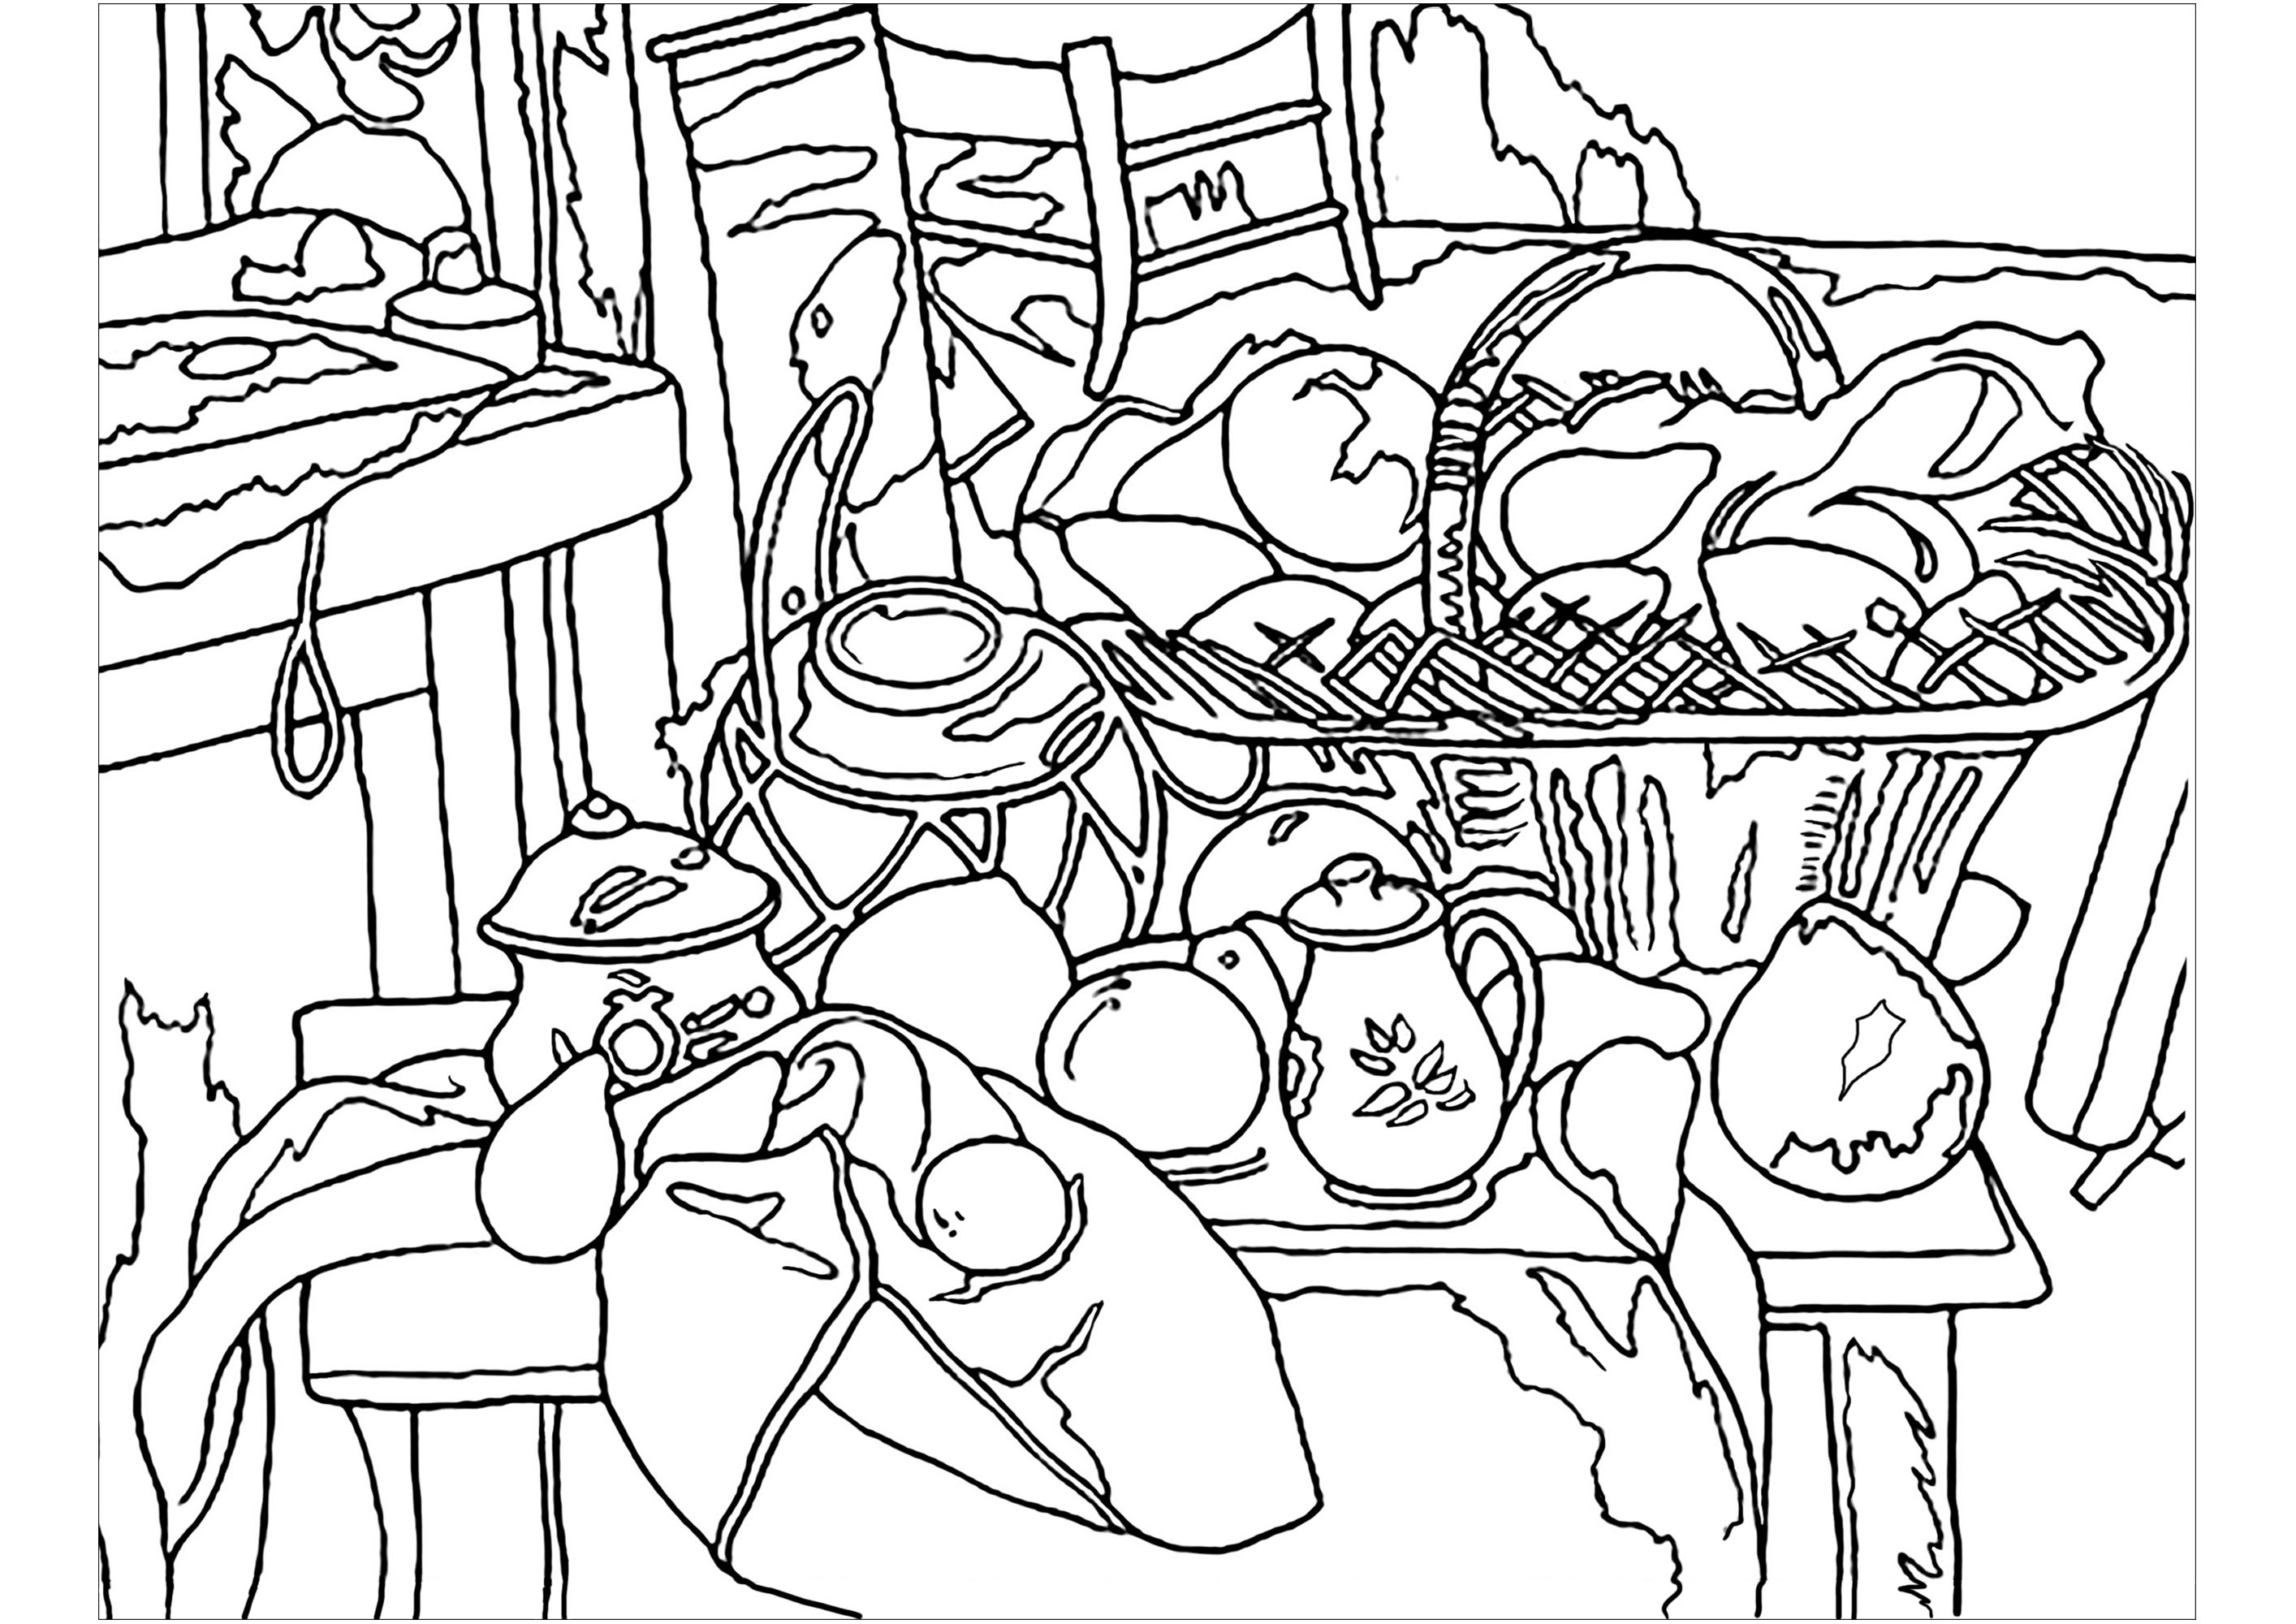 Coloring page created from a Still life by Paul Cézanne : Kitchen Table, Artist : Art. Isabelle